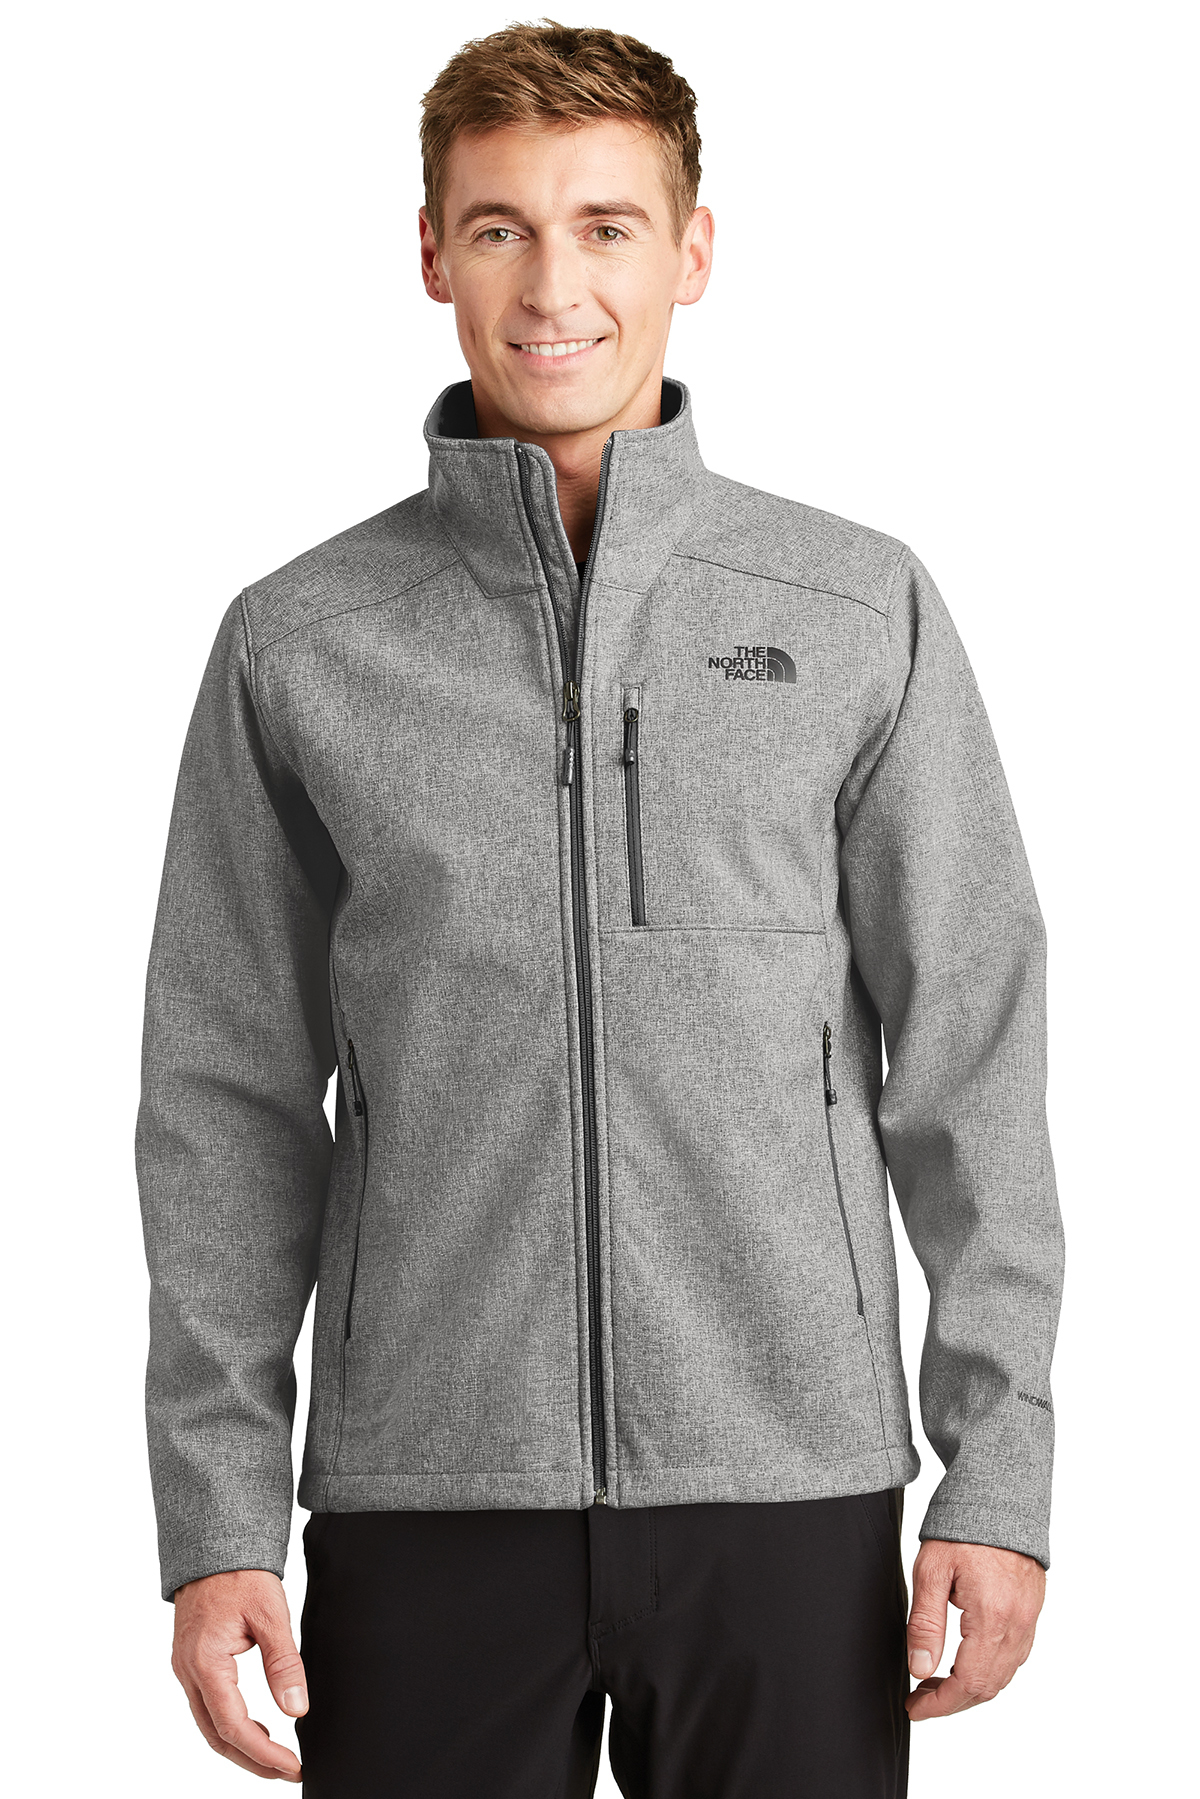 The North Face® Apex Barrier Soft Shell 